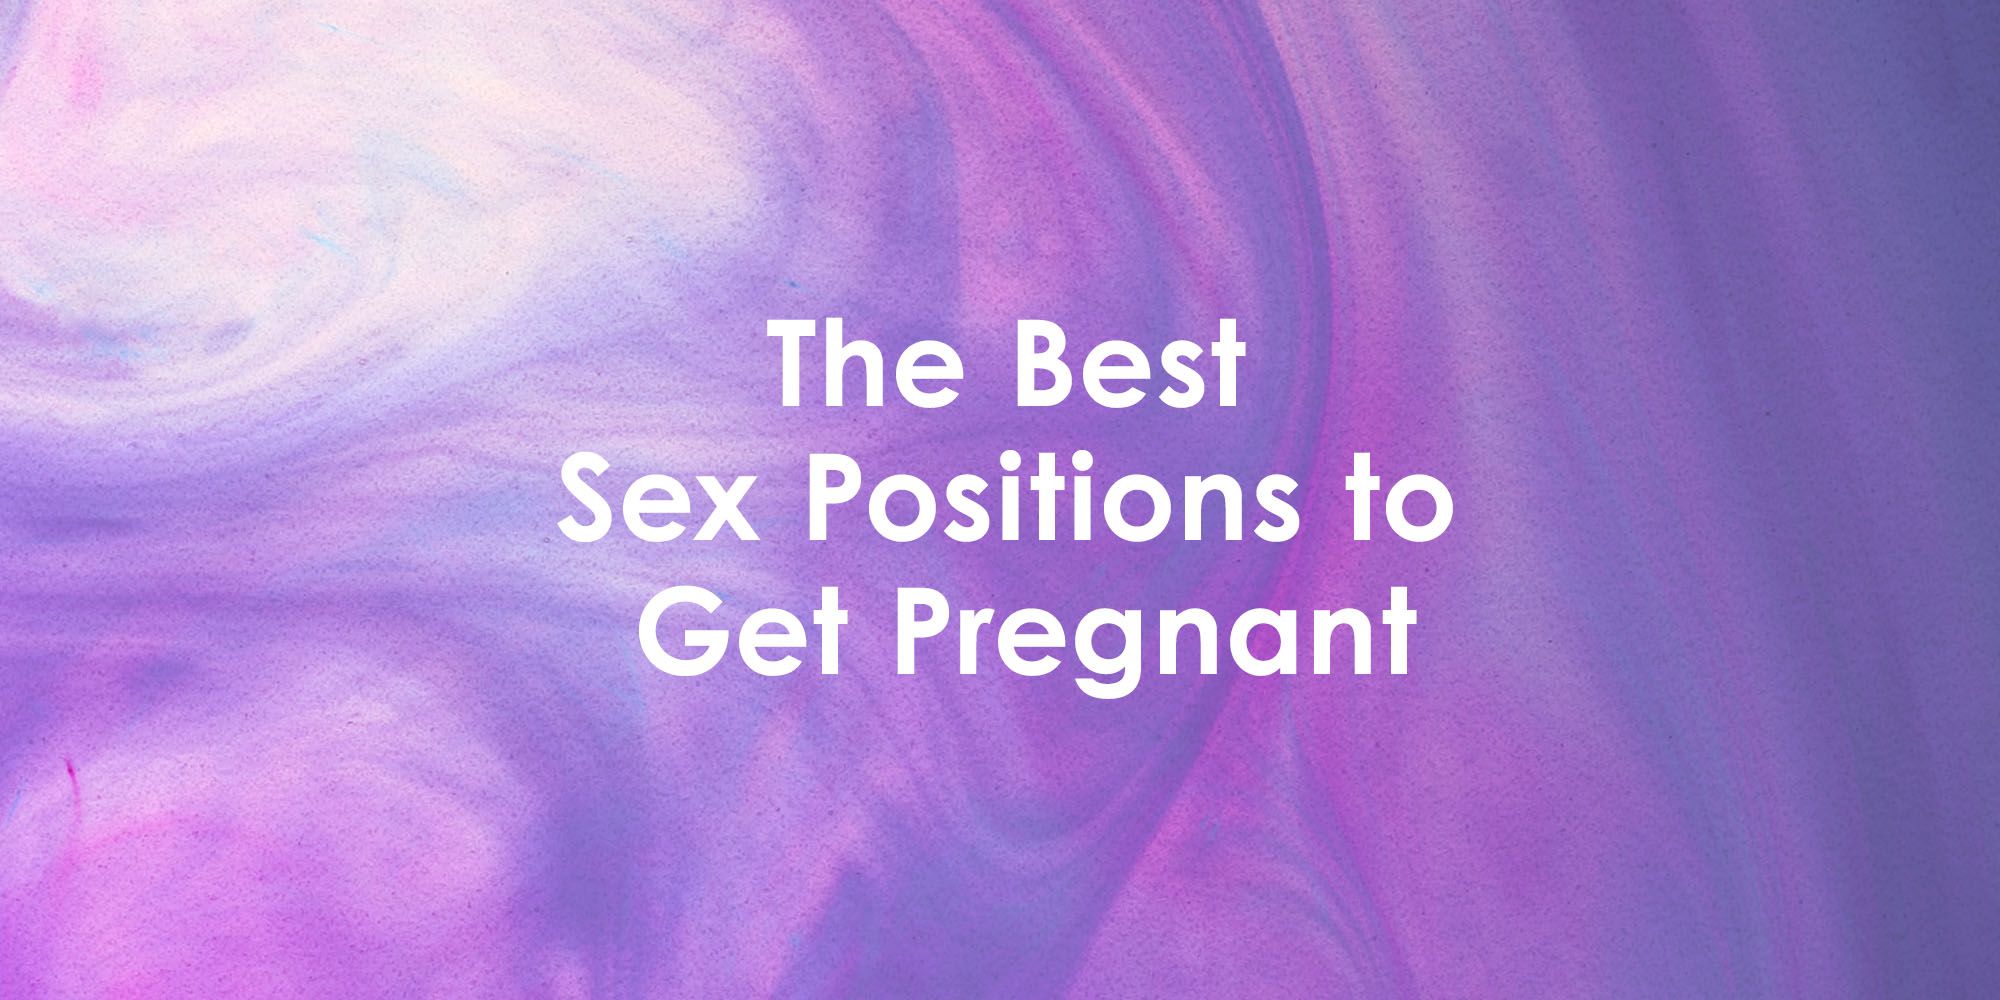 Sex Positions Sure to Get You Pregnant image